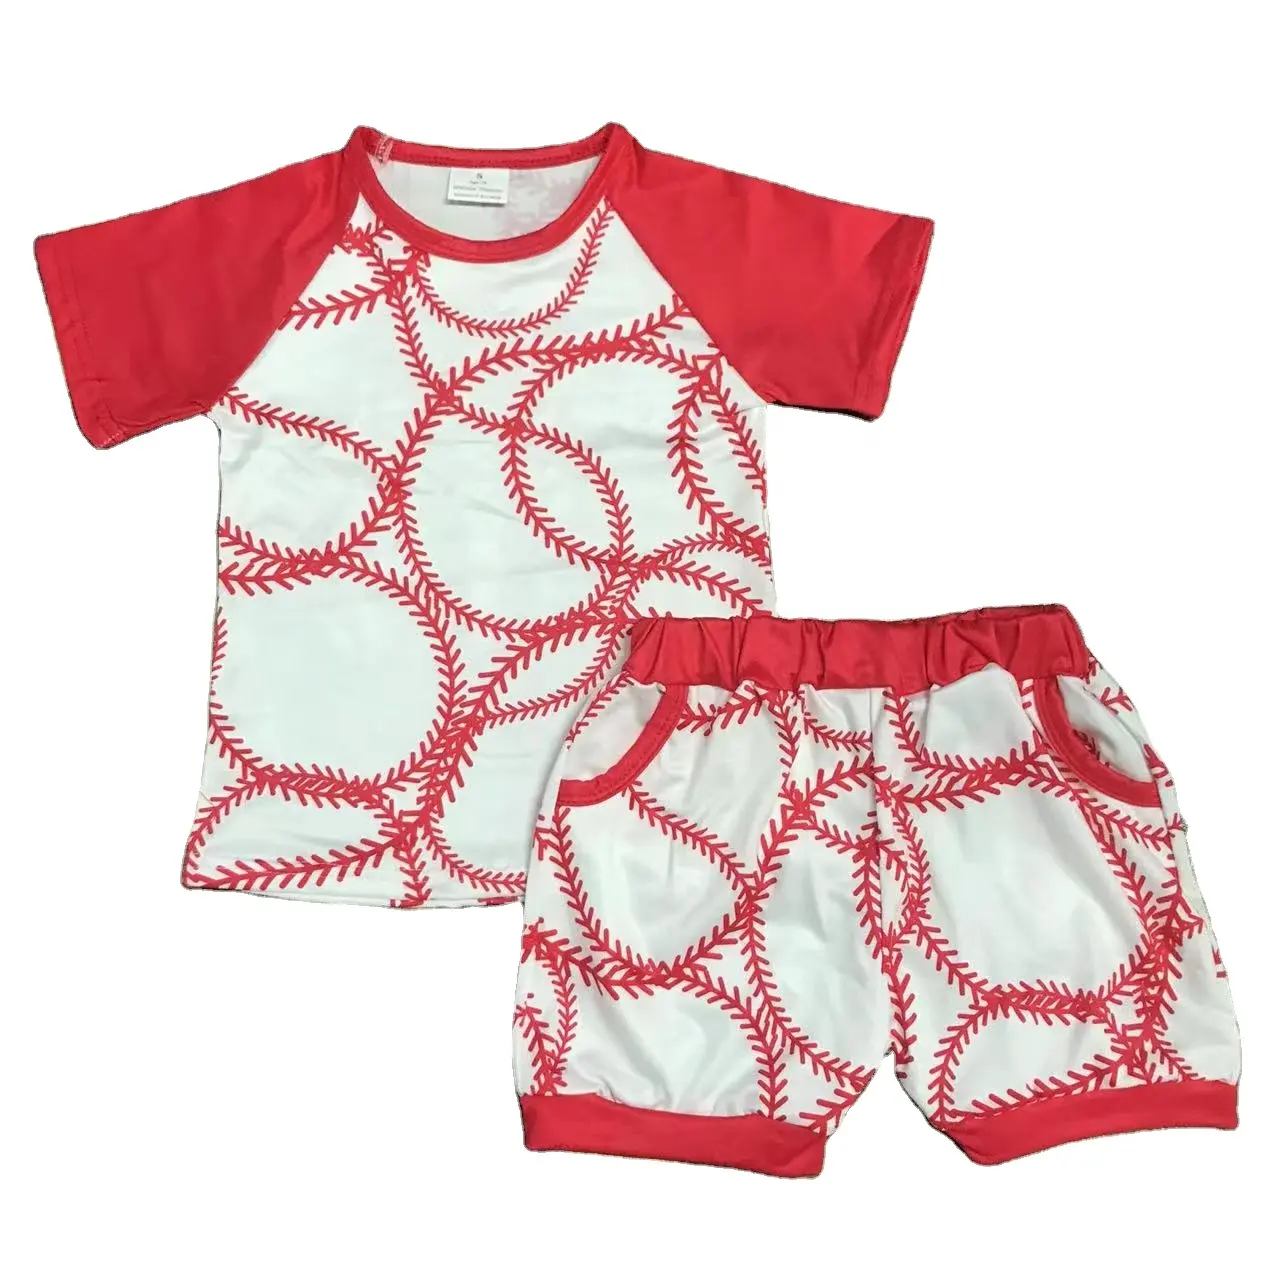 Summer top with shorts two piece girls boutique baby wholesale short sleeves red baseball kids clothing set